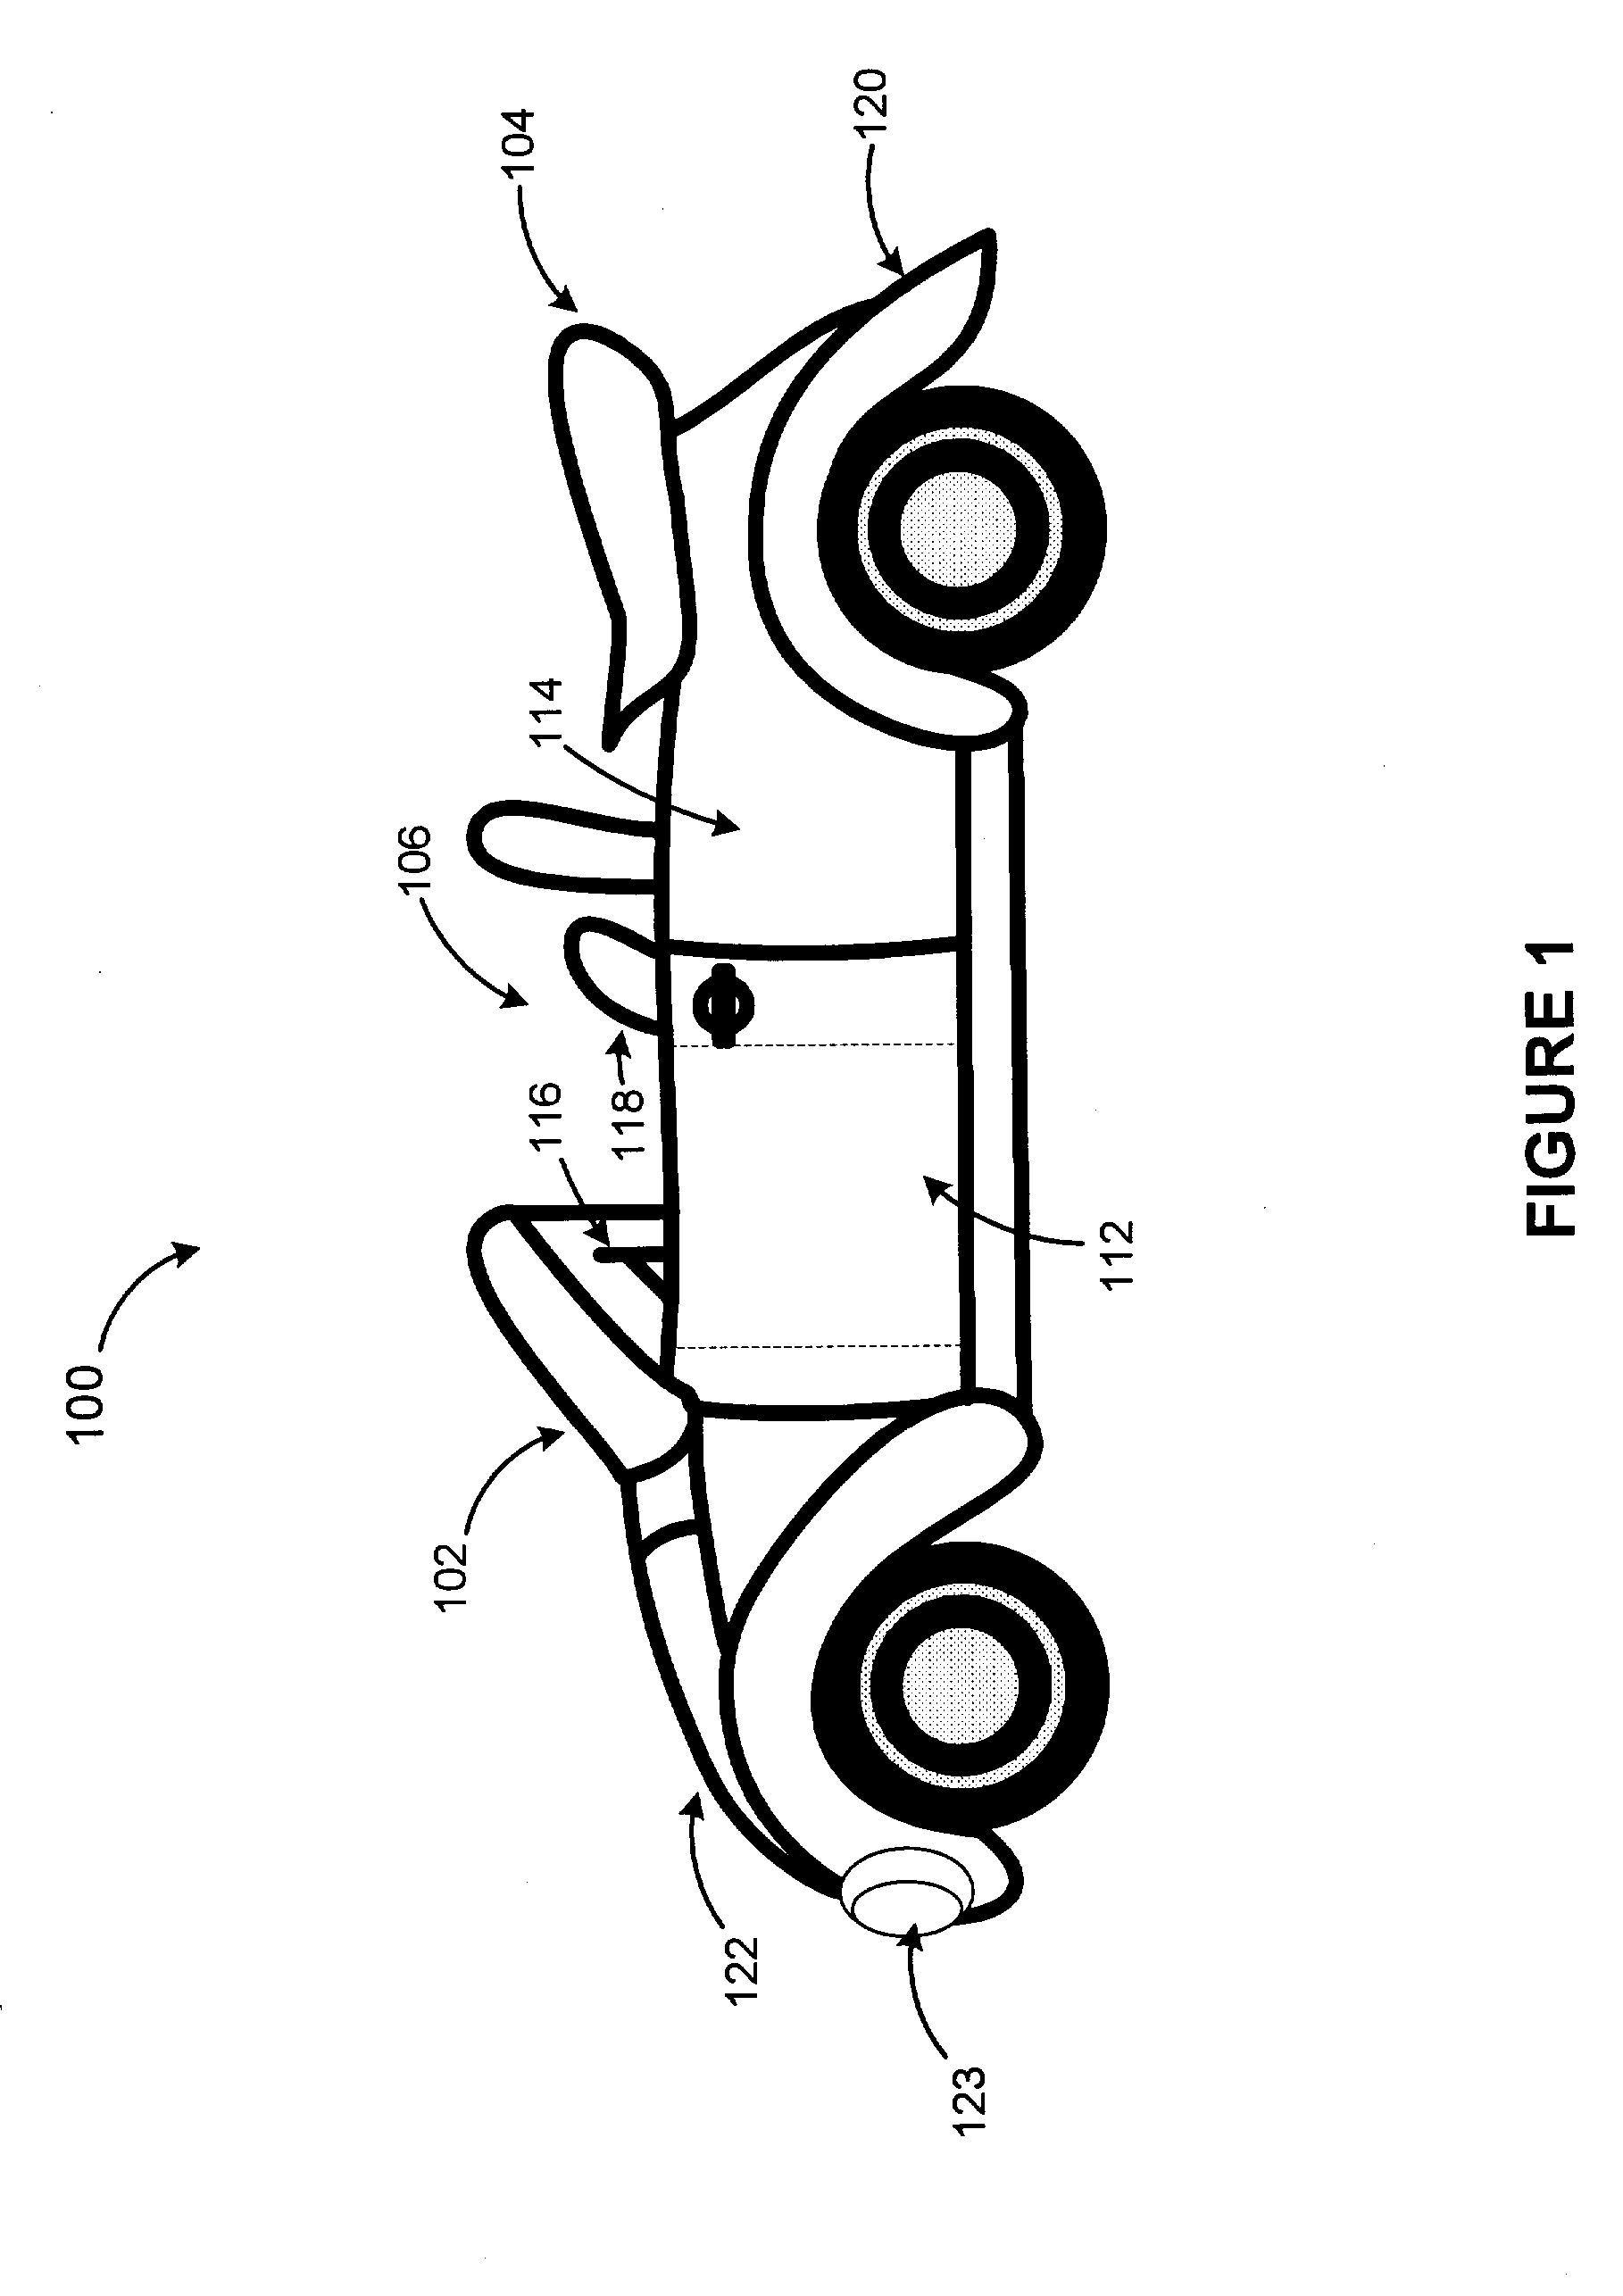 System and method for rain detection and automatic operation of power roof and power windows